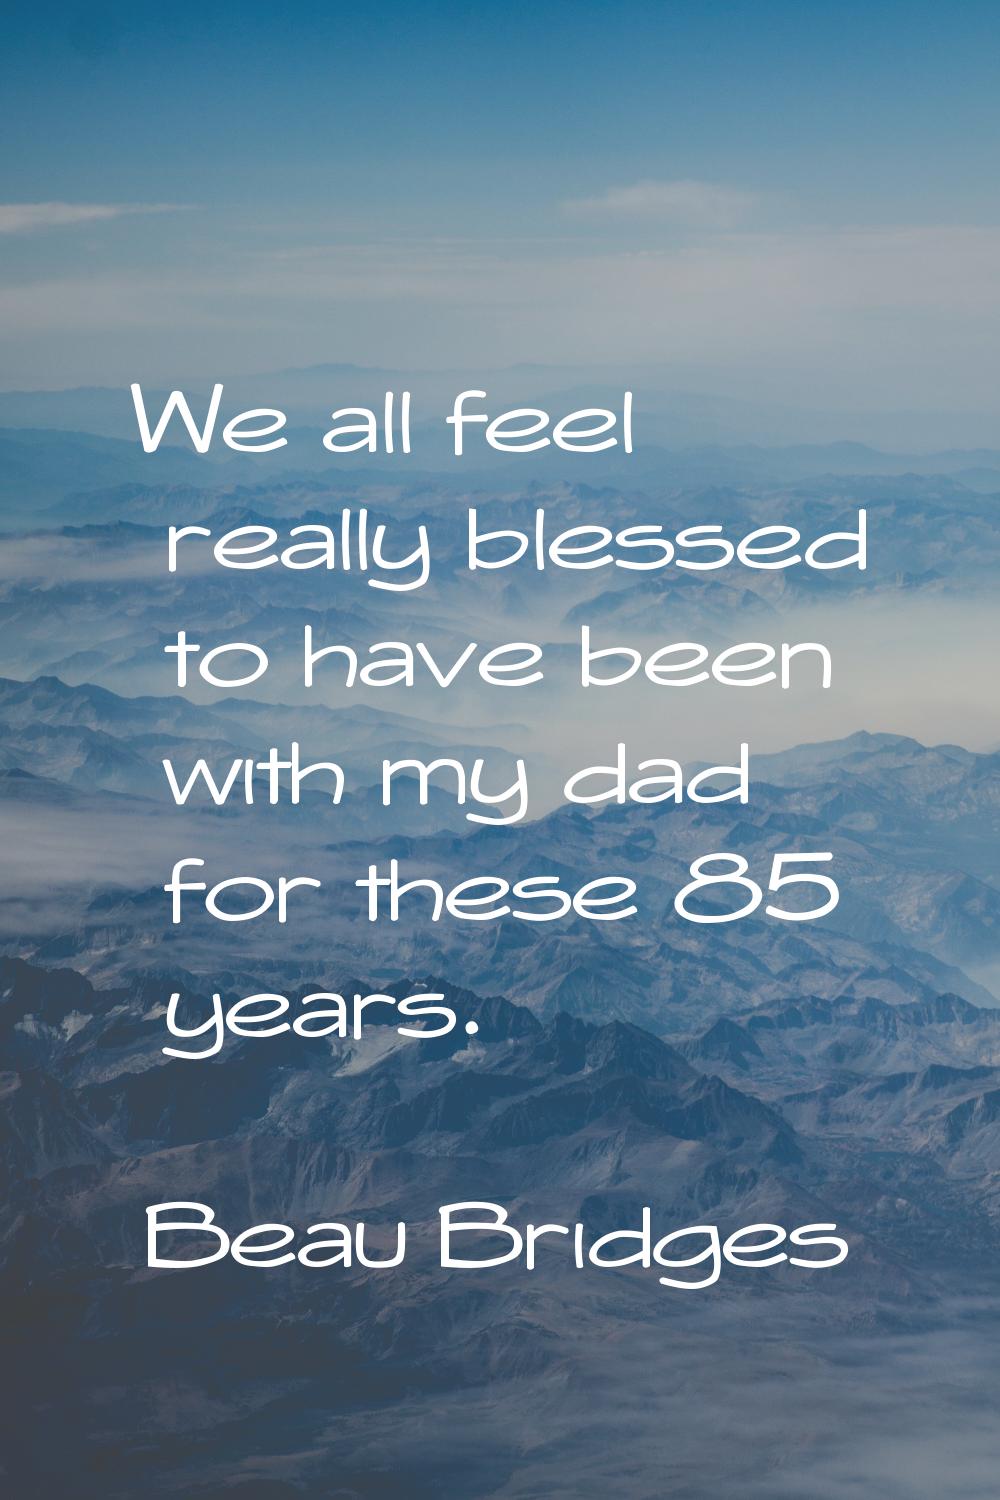 We all feel really blessed to have been with my dad for these 85 years.